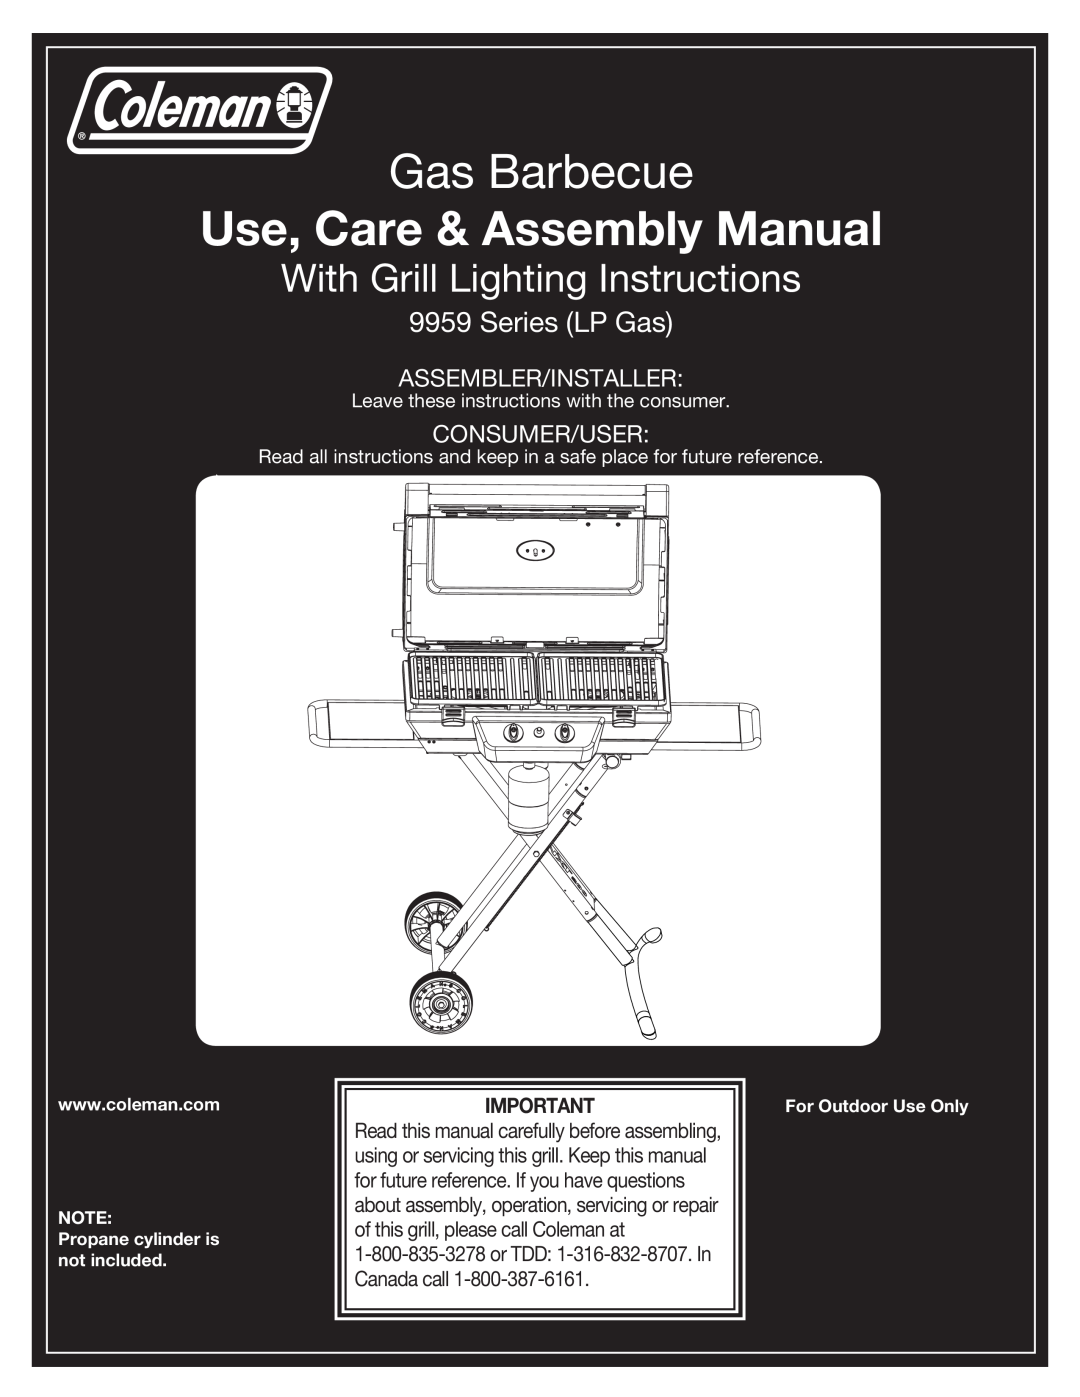 Coleman 9959 manual Gas Barbecue, Use, Care & Assembly Manual, With Grill Lighting Instructions, Series LP Gas 